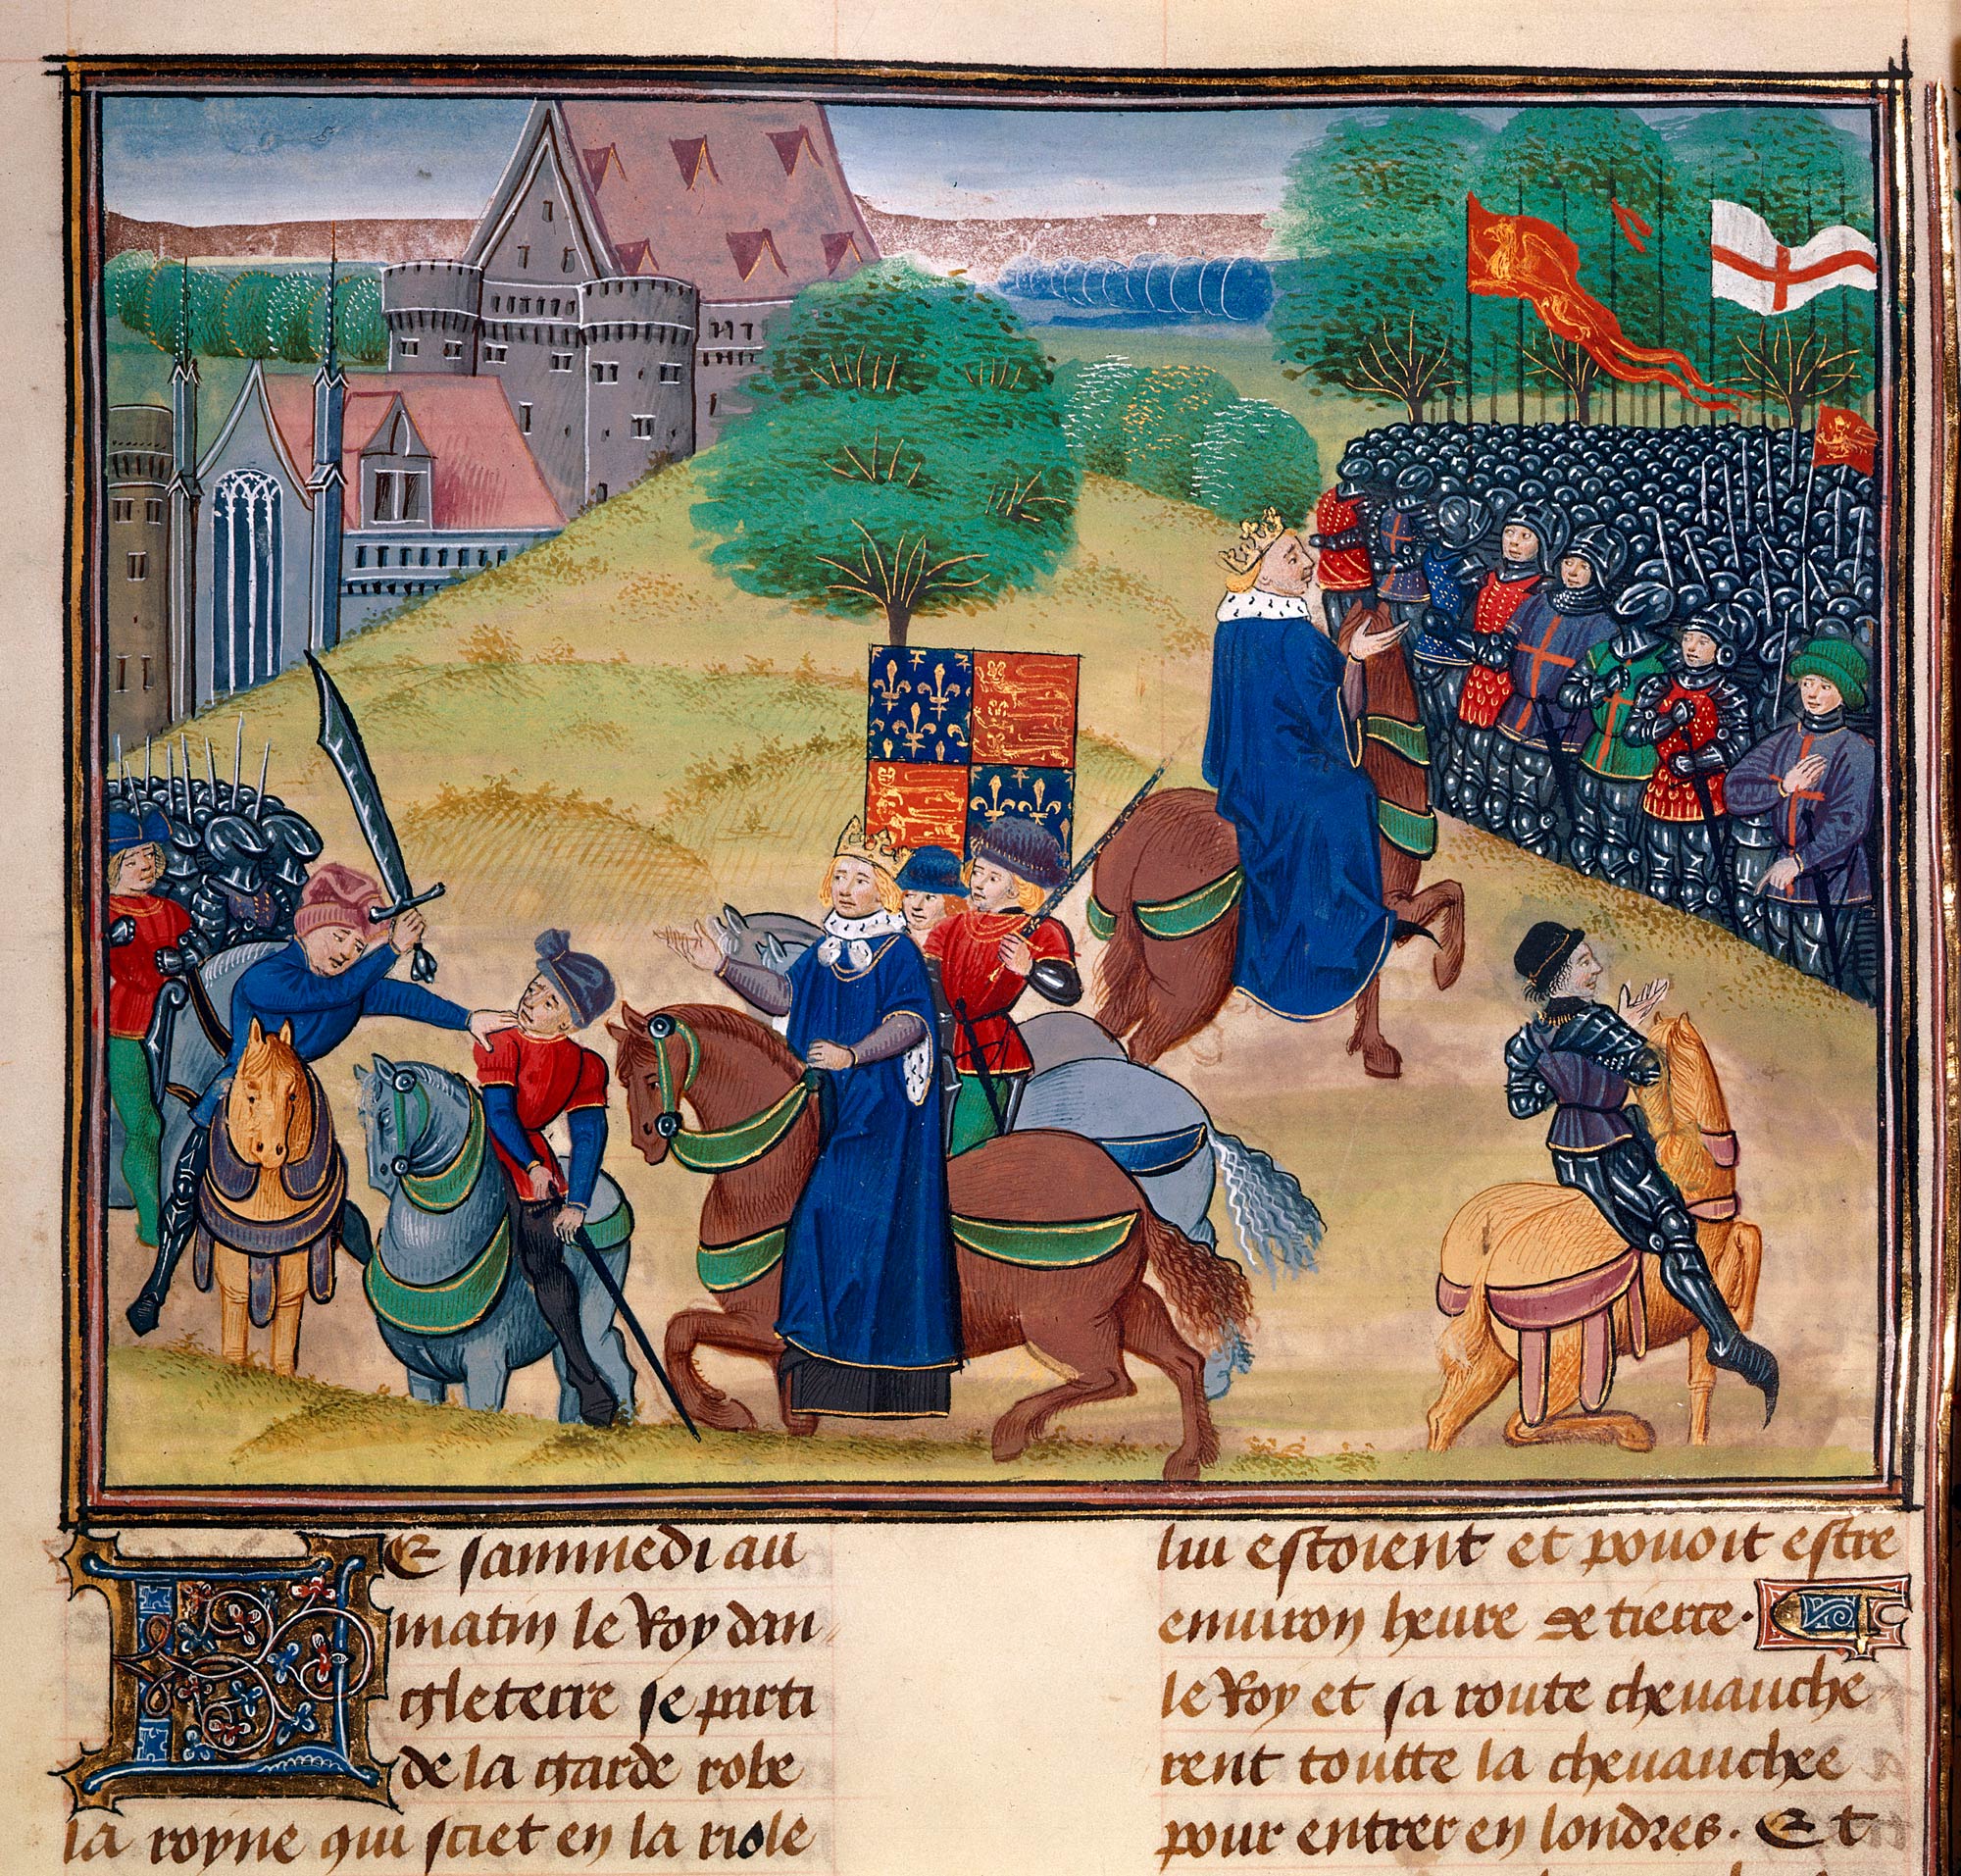 peasants in the middle ages